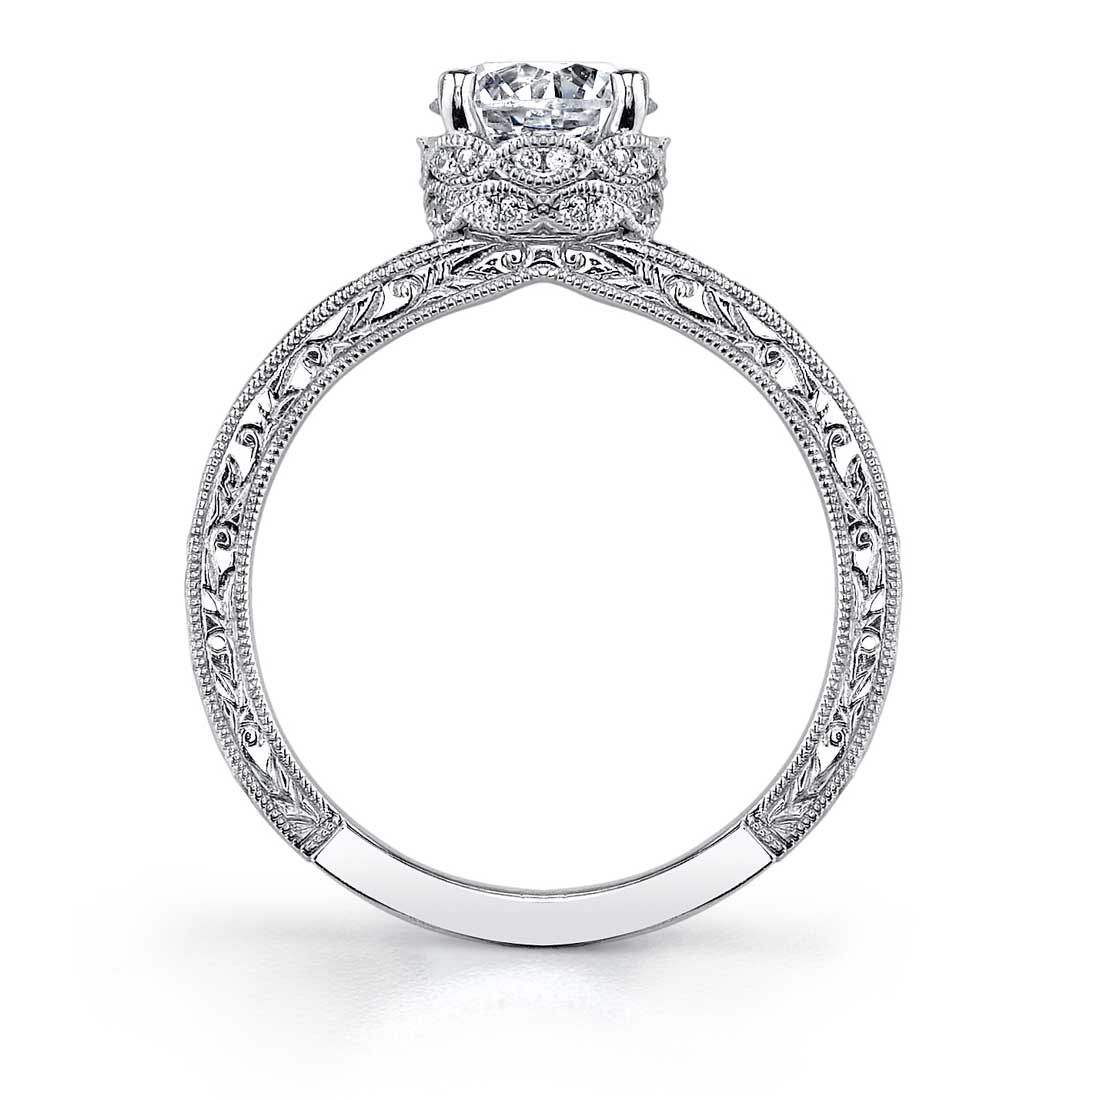 Profile Image of a Vintage Inspired Classic Engagement Ring